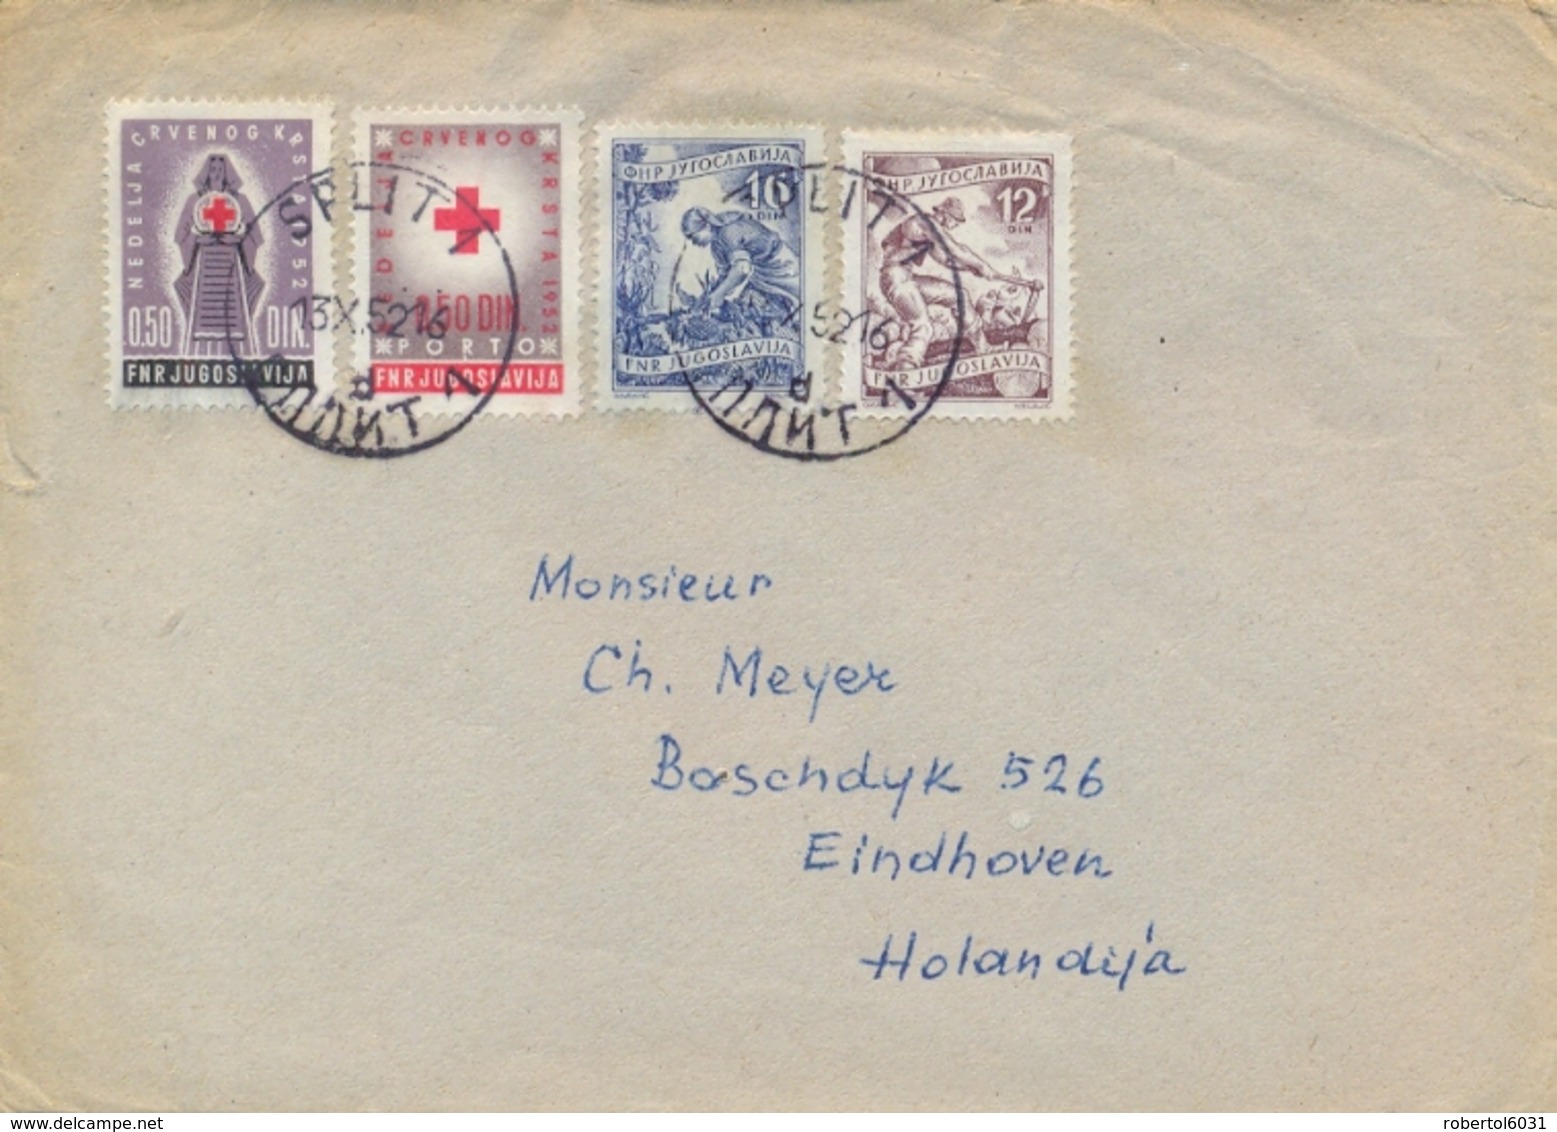 Yugoslavia 1952 Cover To Netherlands With 12 D. + 16 D. + Red Cross Tax Stamp 2 X 0,50 D. - Covers & Documents